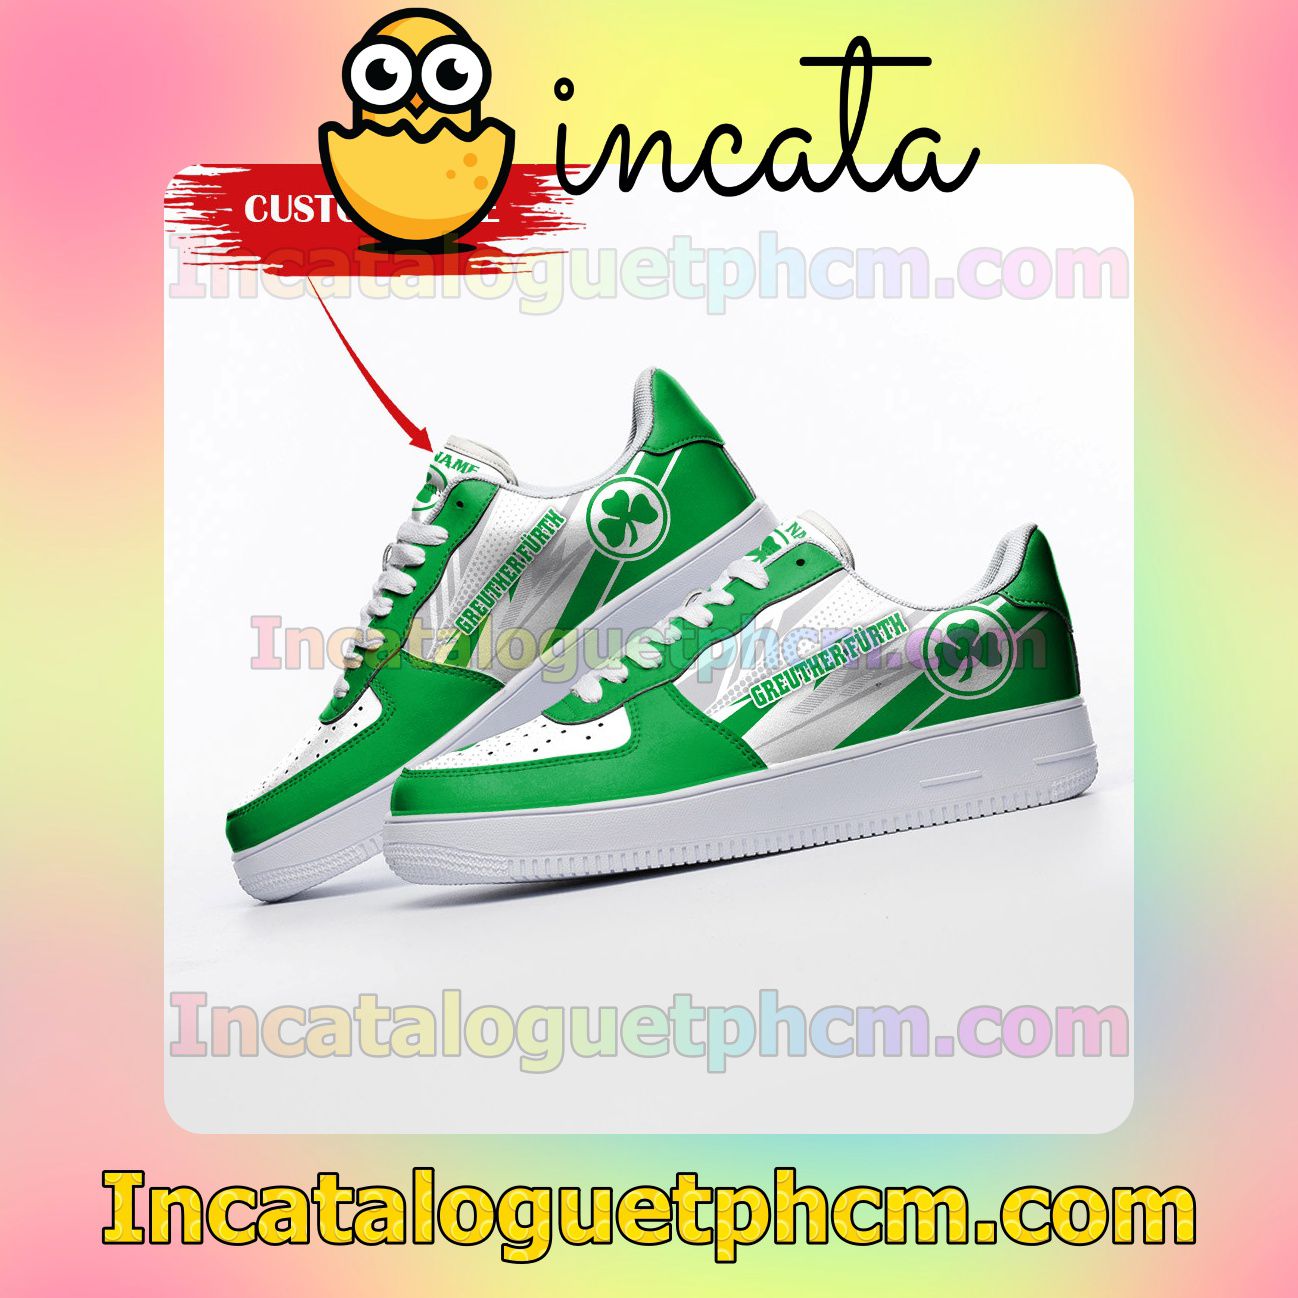 Print On Demand Personalized Bundesliga Greuther Fürth Custom Name Nike Low Shoes Sneakers